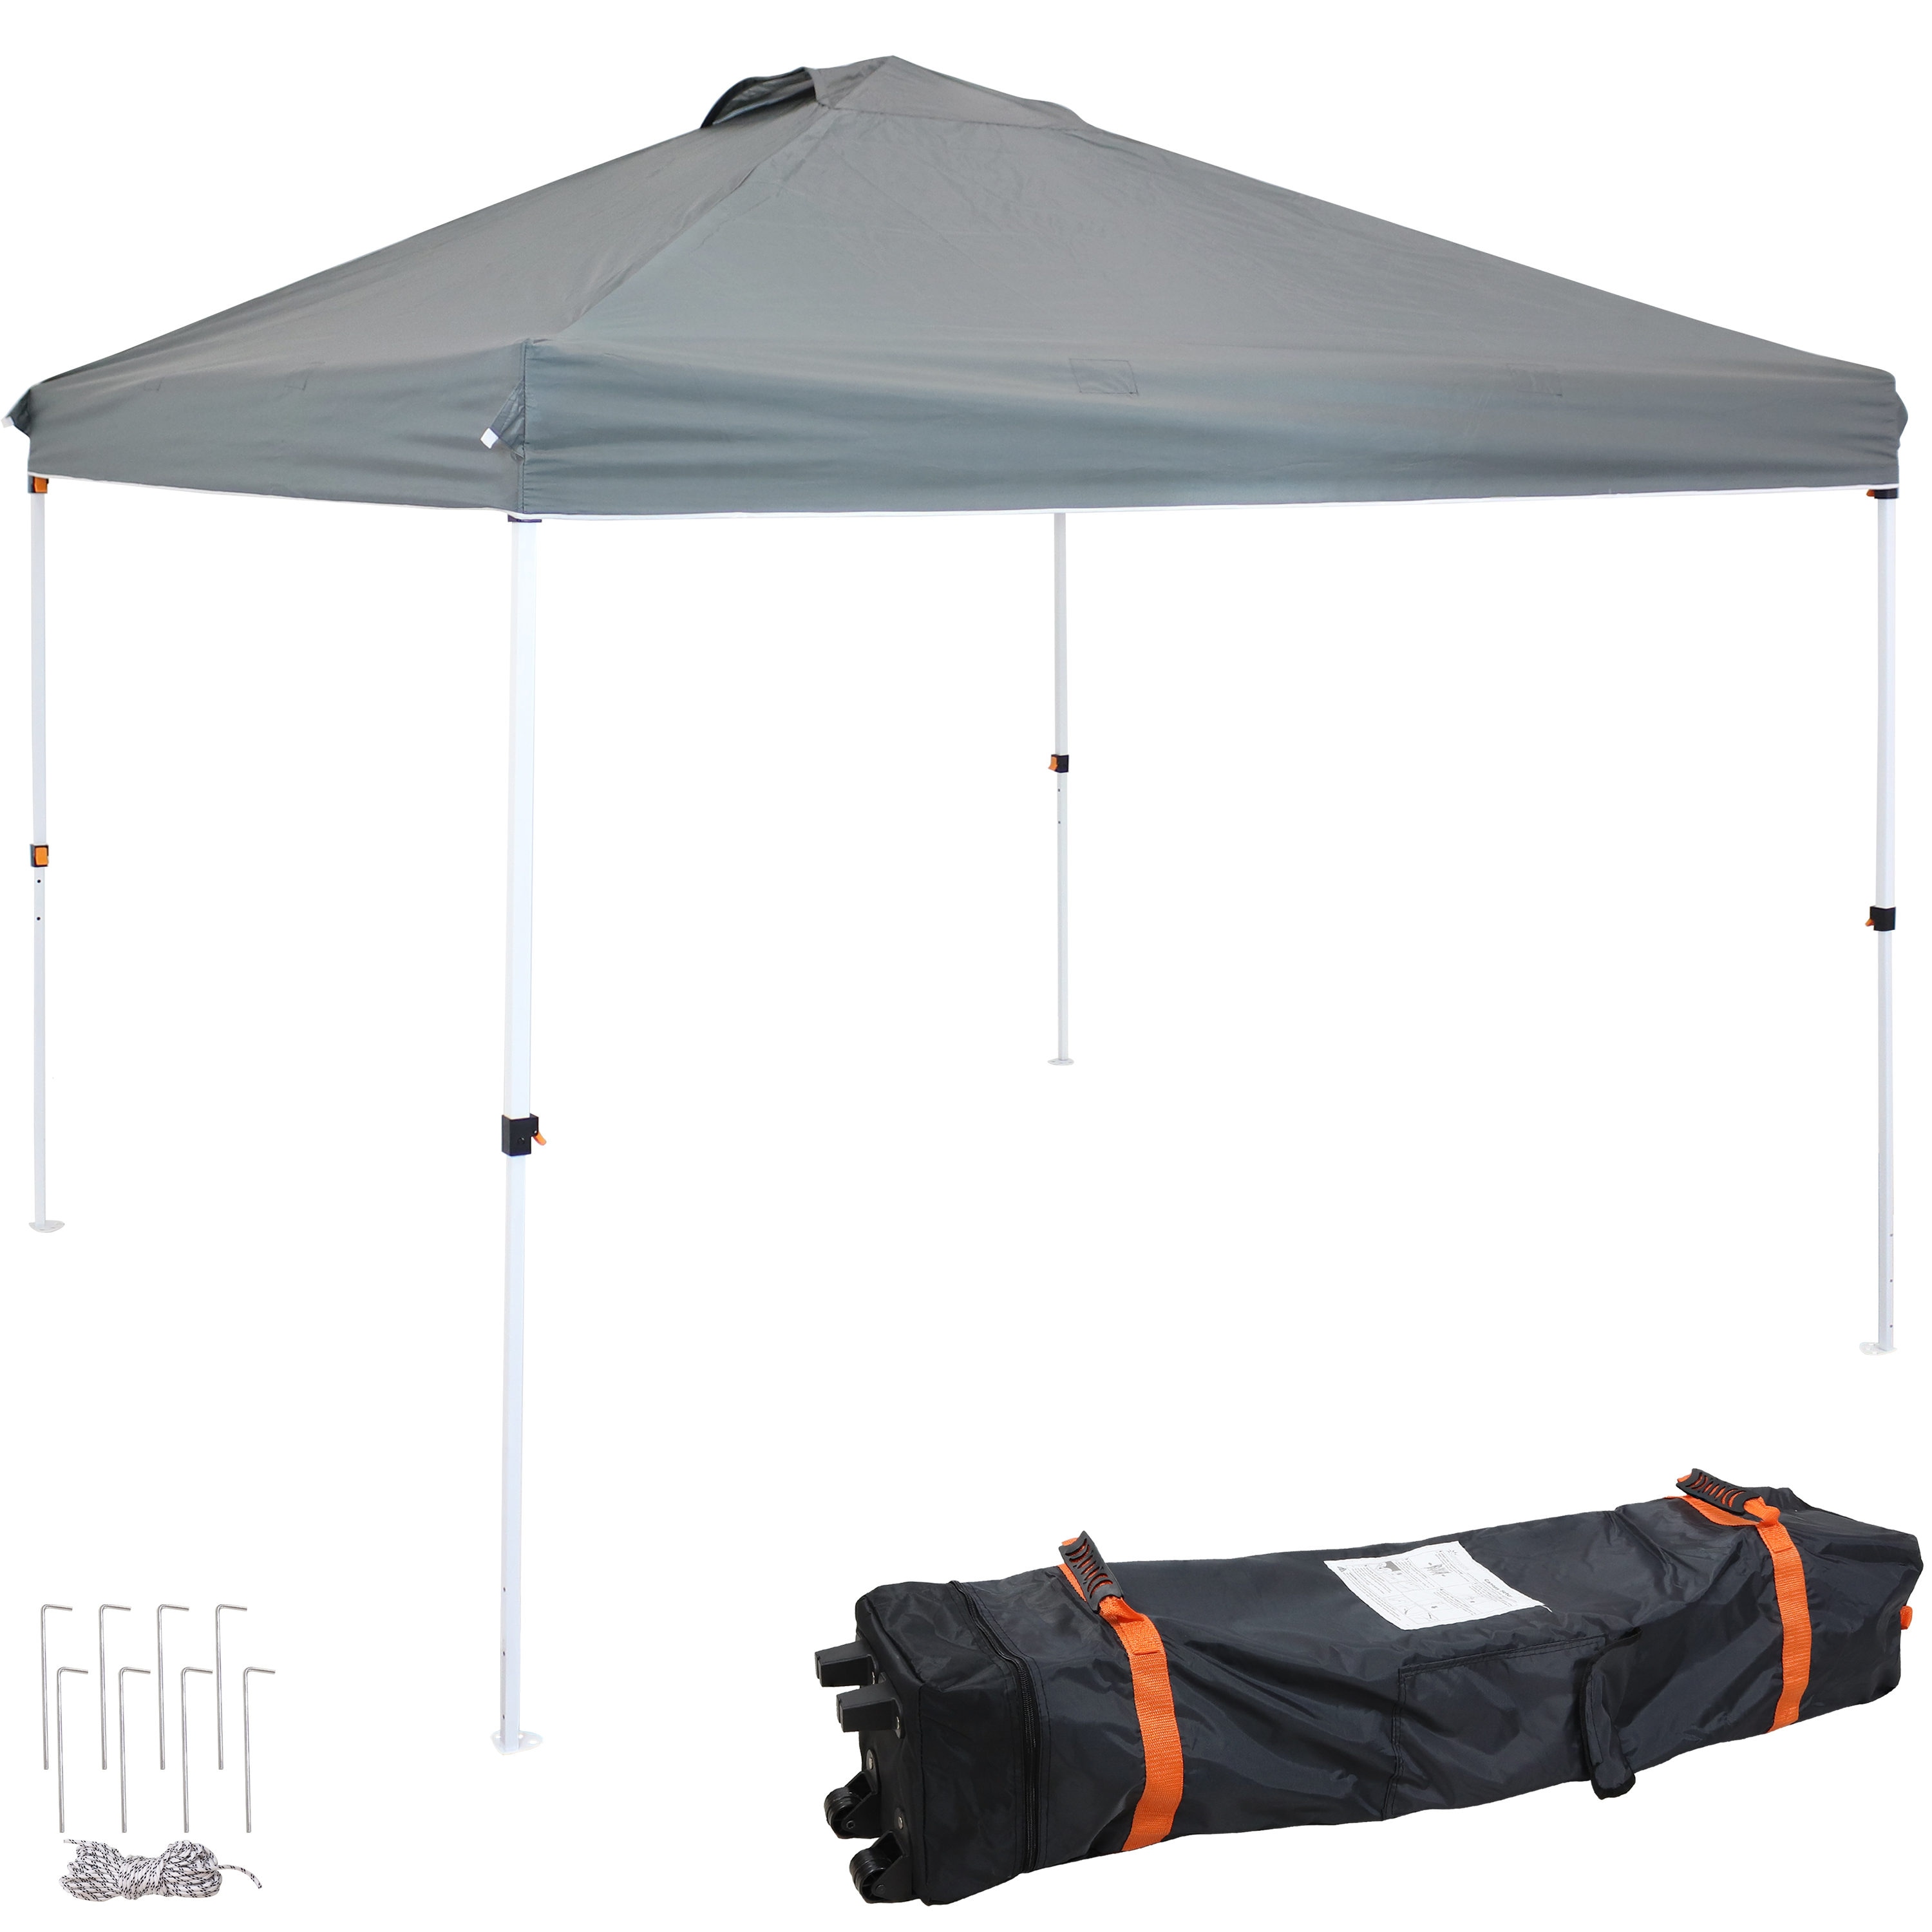 Sunnydaze Premium Pop-Up Canopy with Rolling Carry Bag - Gray - 12' x 12